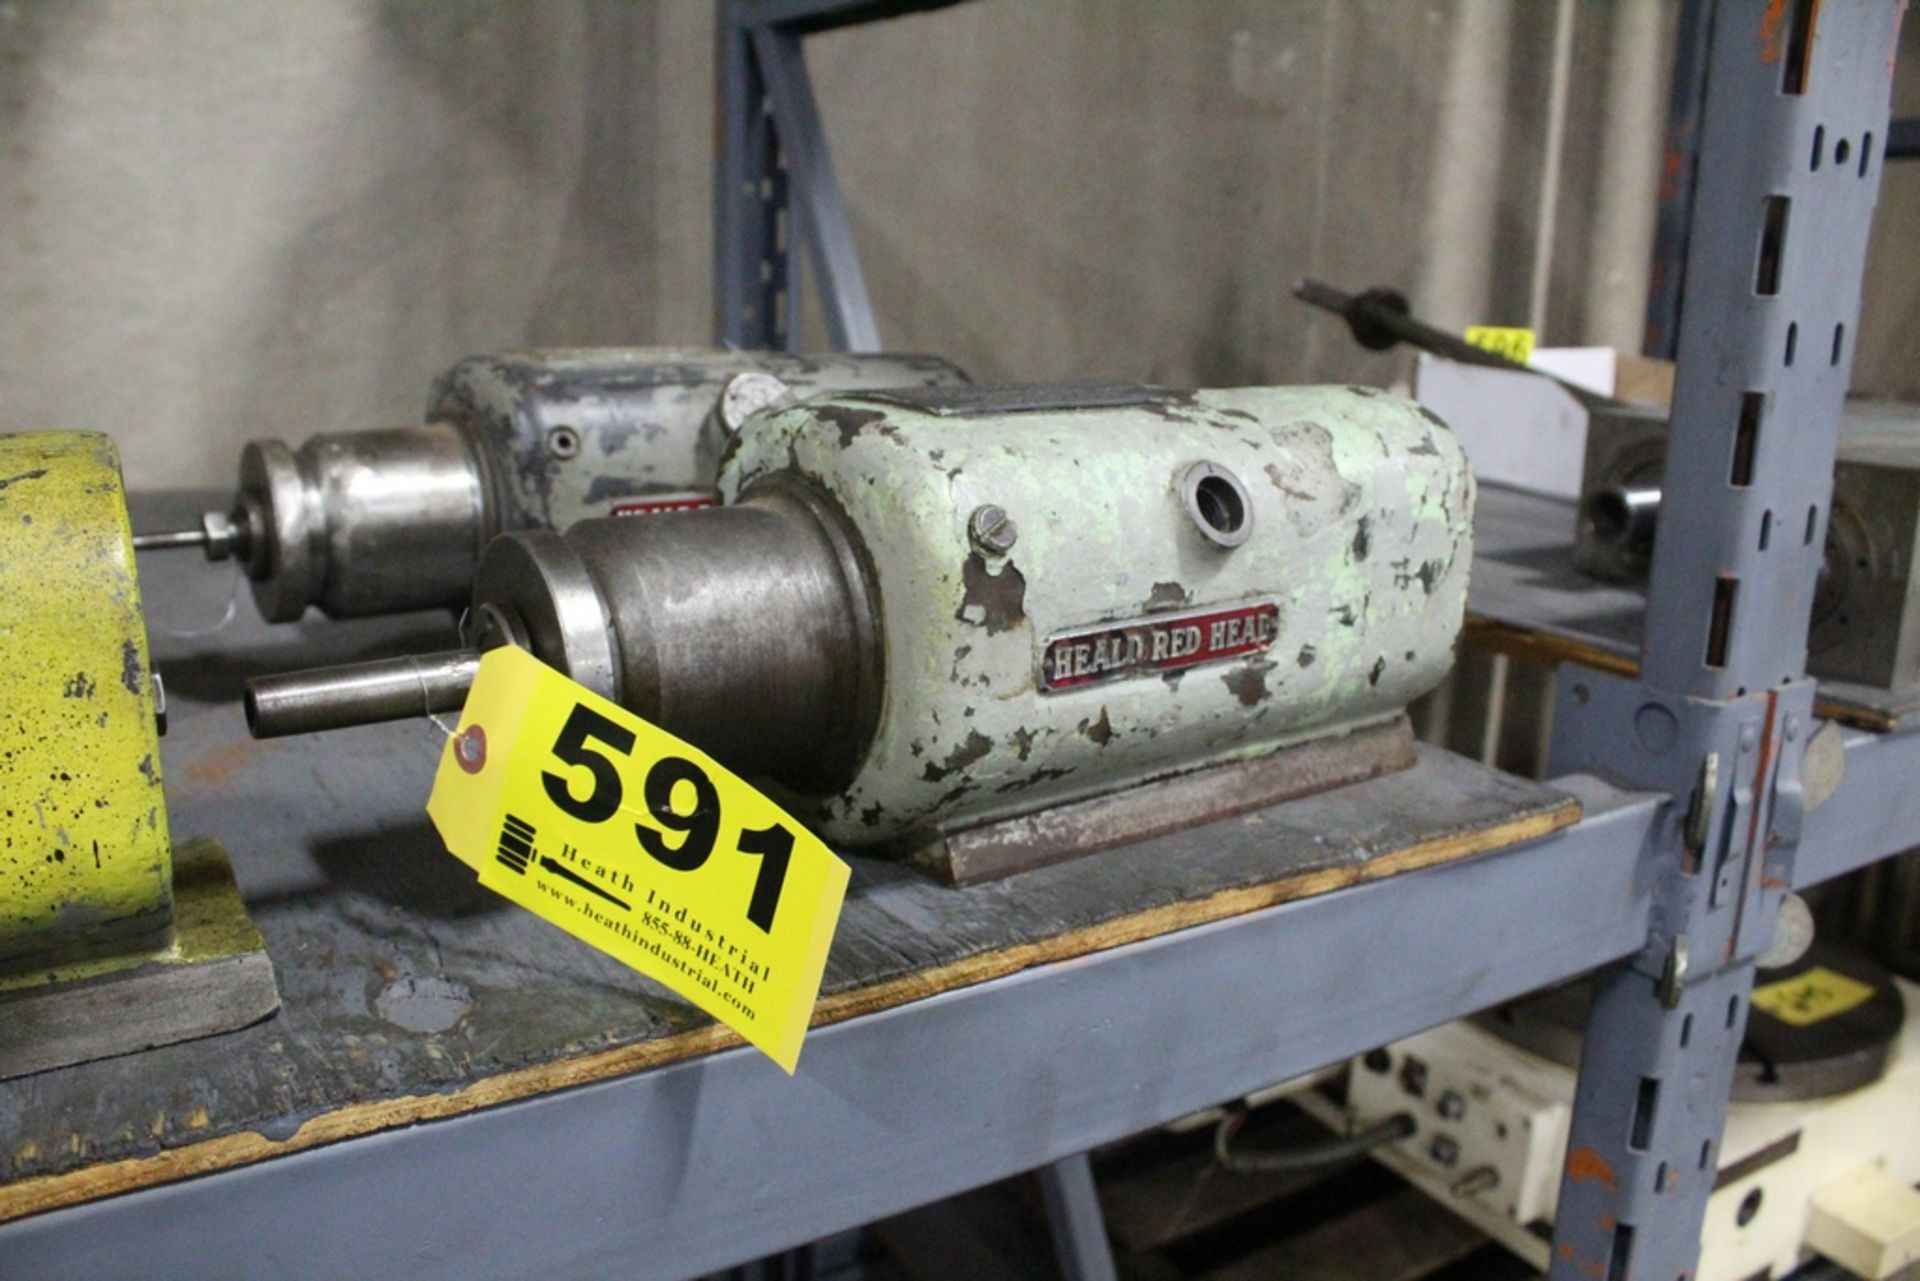 HEALD READ HEAD GRINDING SPINDLE